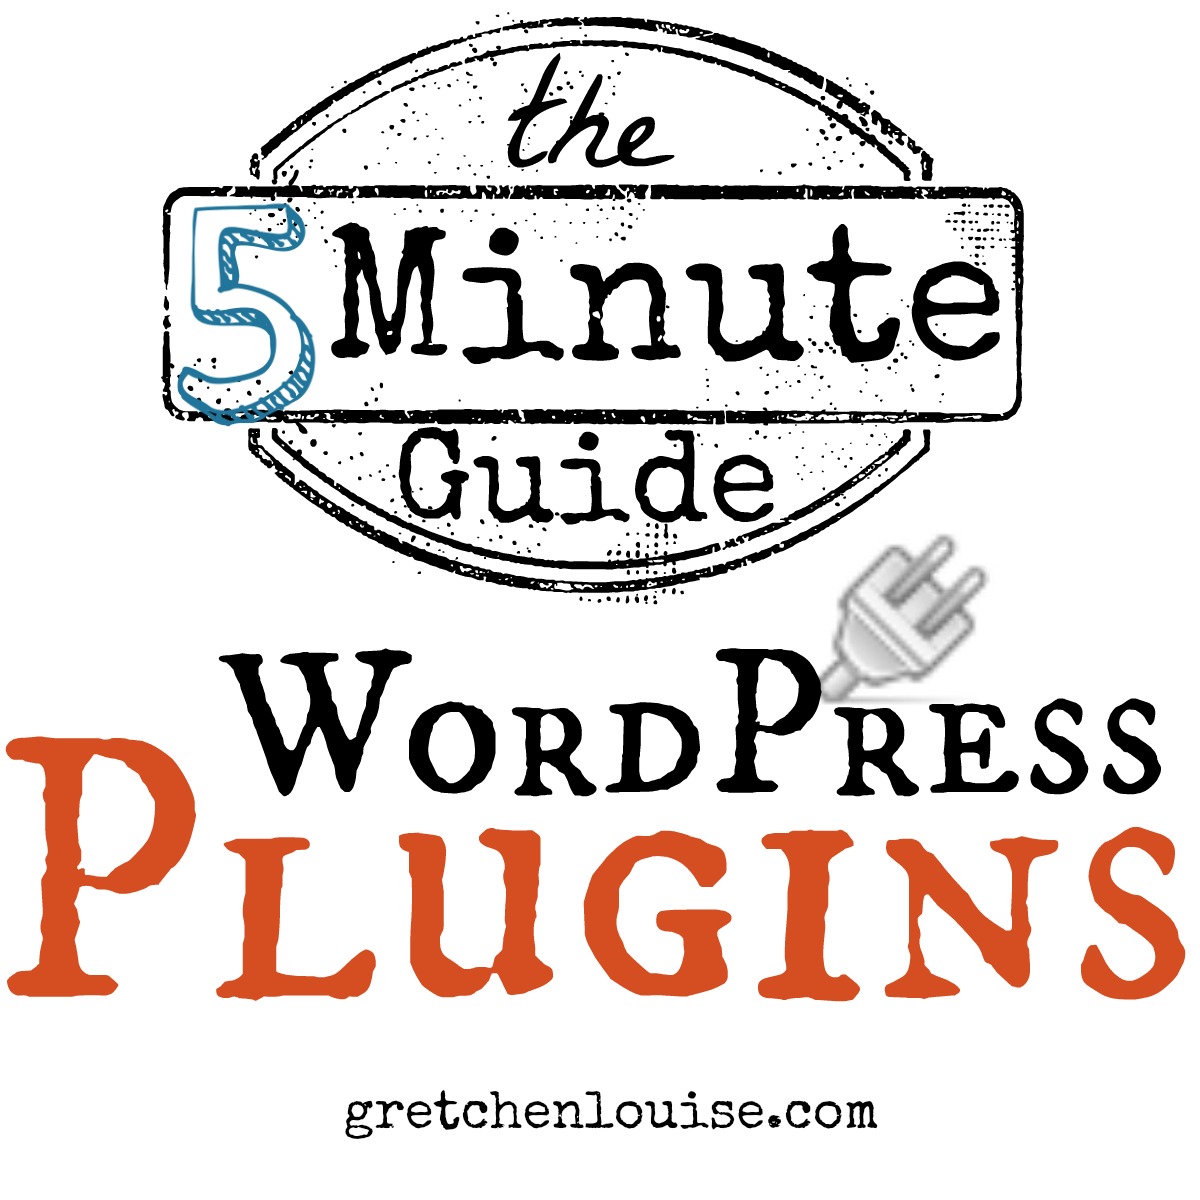 The 5 Minute Guide to WordPress Plugins